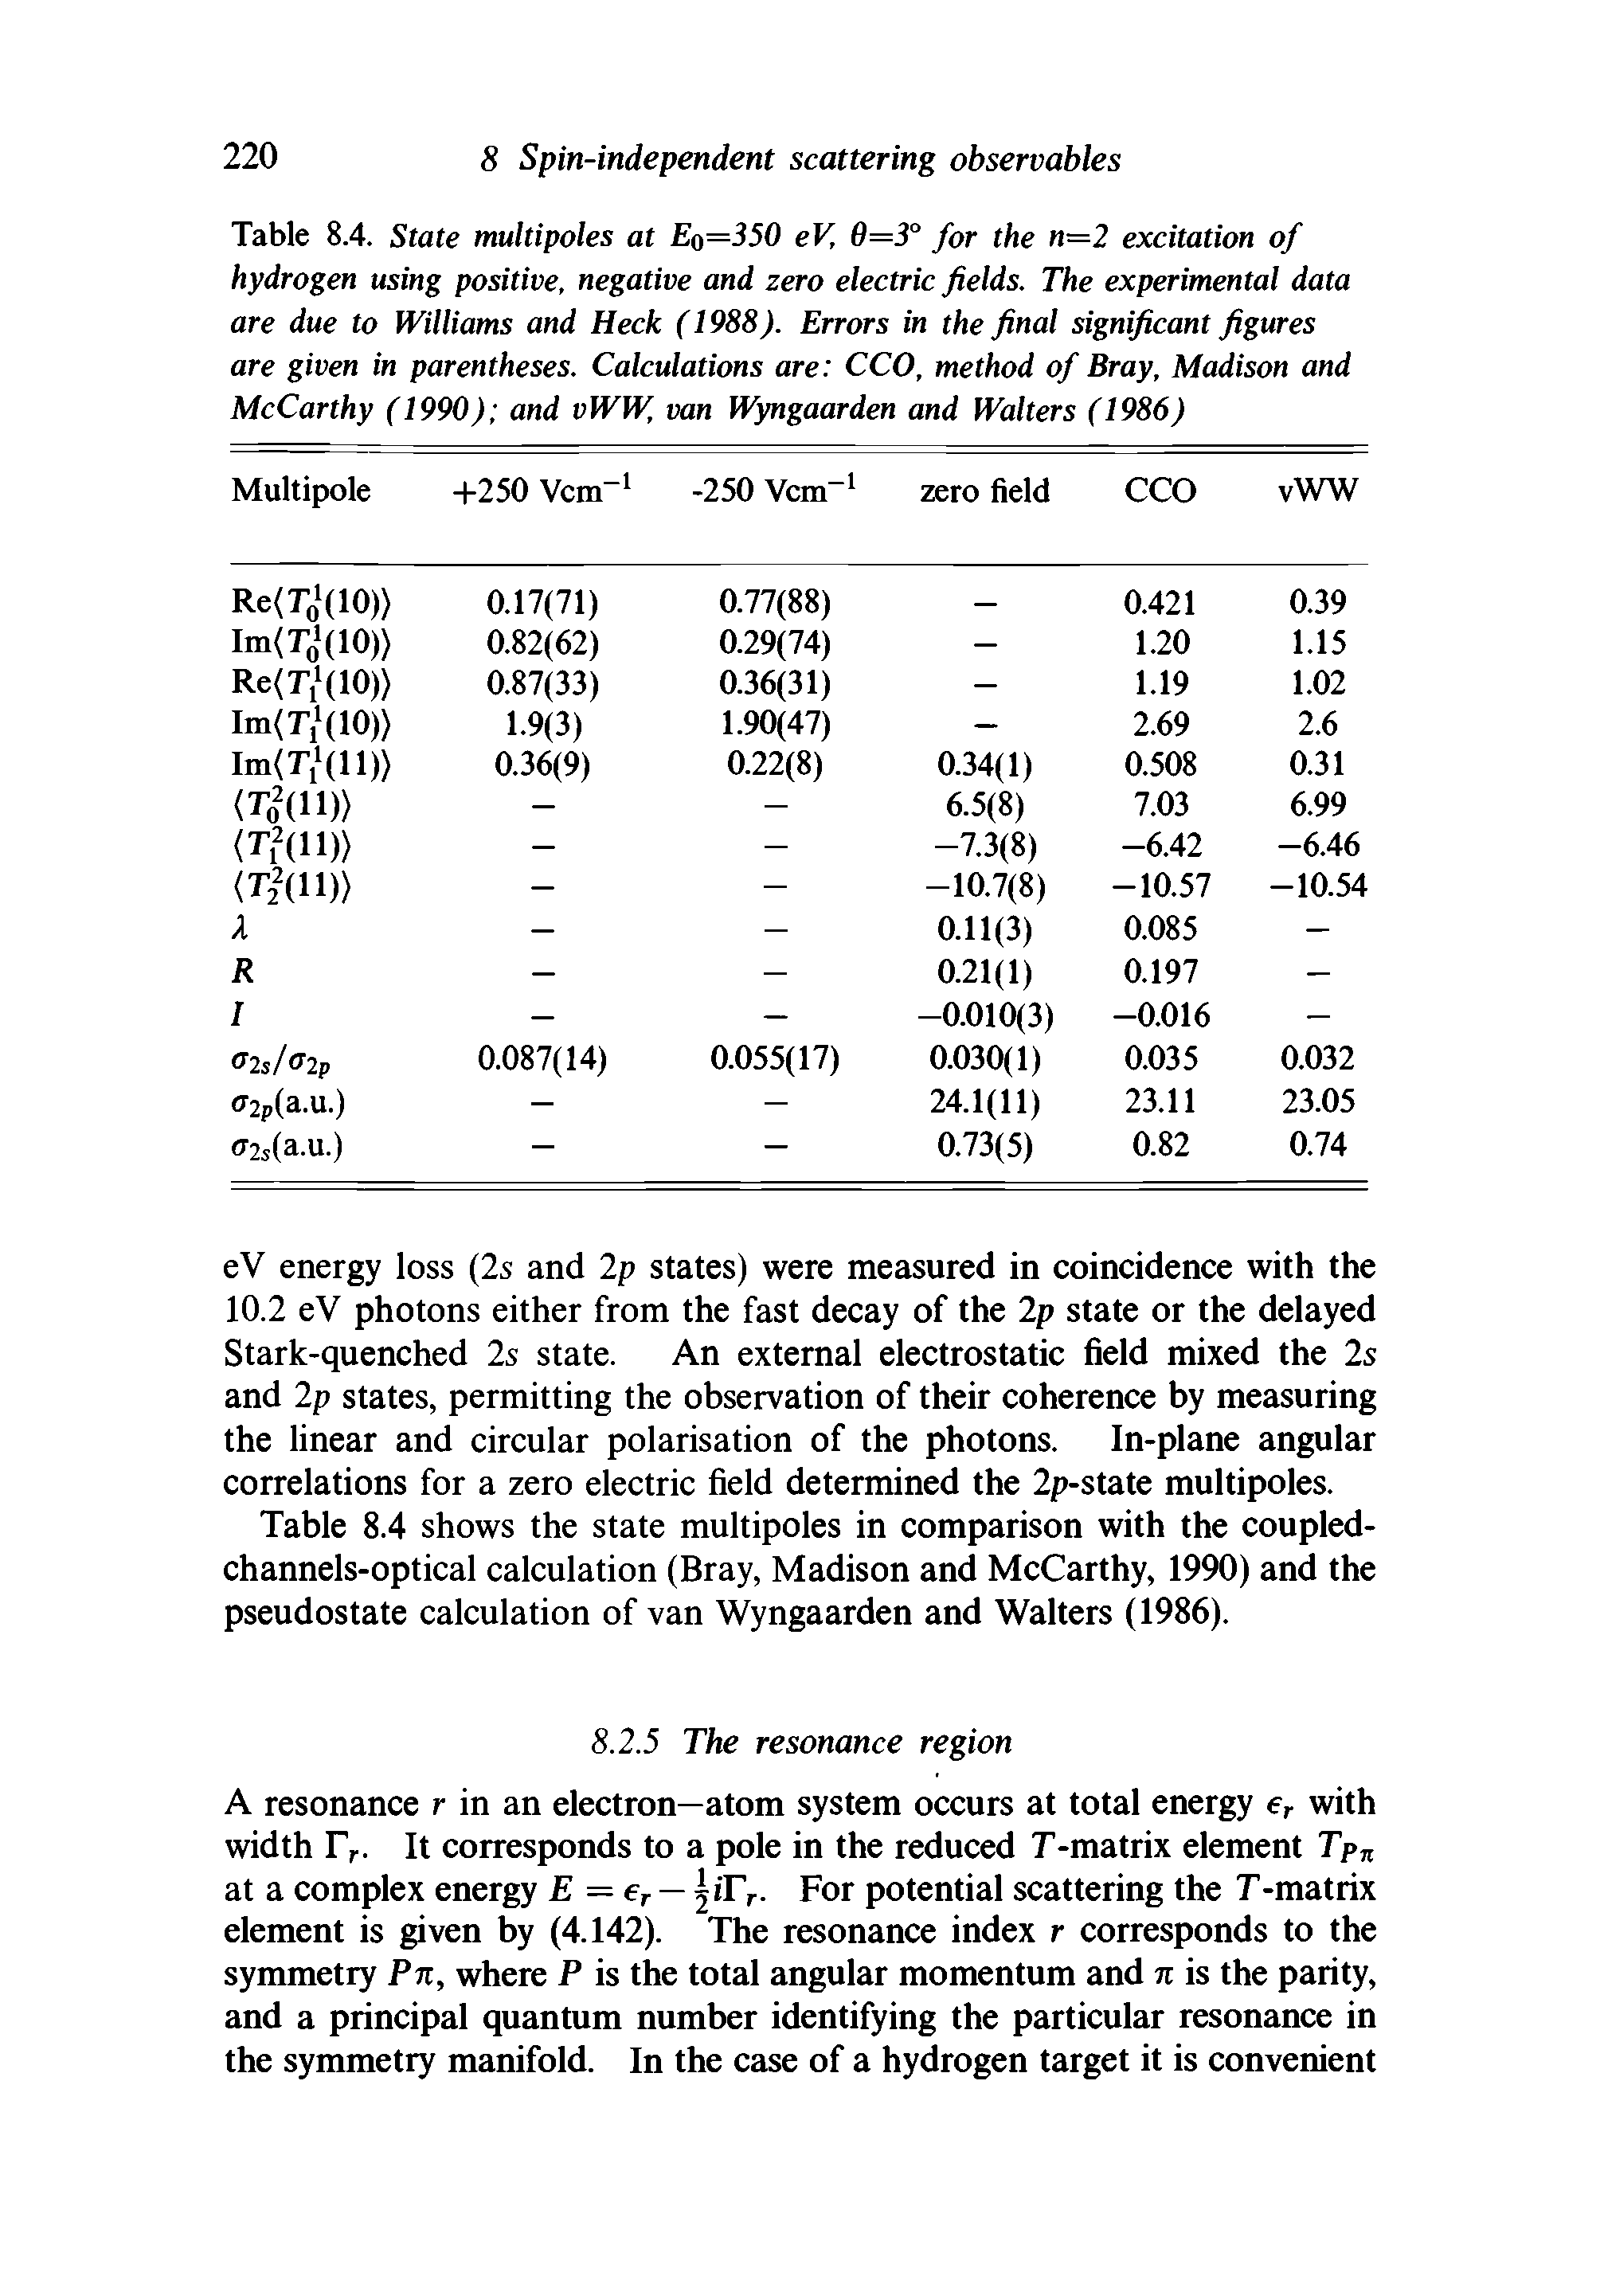 Table 8.4. State multipoles at Eo=350 eV, 6=3° for the n=2 excitation of hydrogen using positive, negative and zero electric fields. The experimental data are due to Williams and Heck (1988). Errors in the final significant figures are given in parentheses. Calculations are CCO, method of Bray, Madison and McCarthy (1990) and vWW, van Wyngaarden and Walters (1986)...